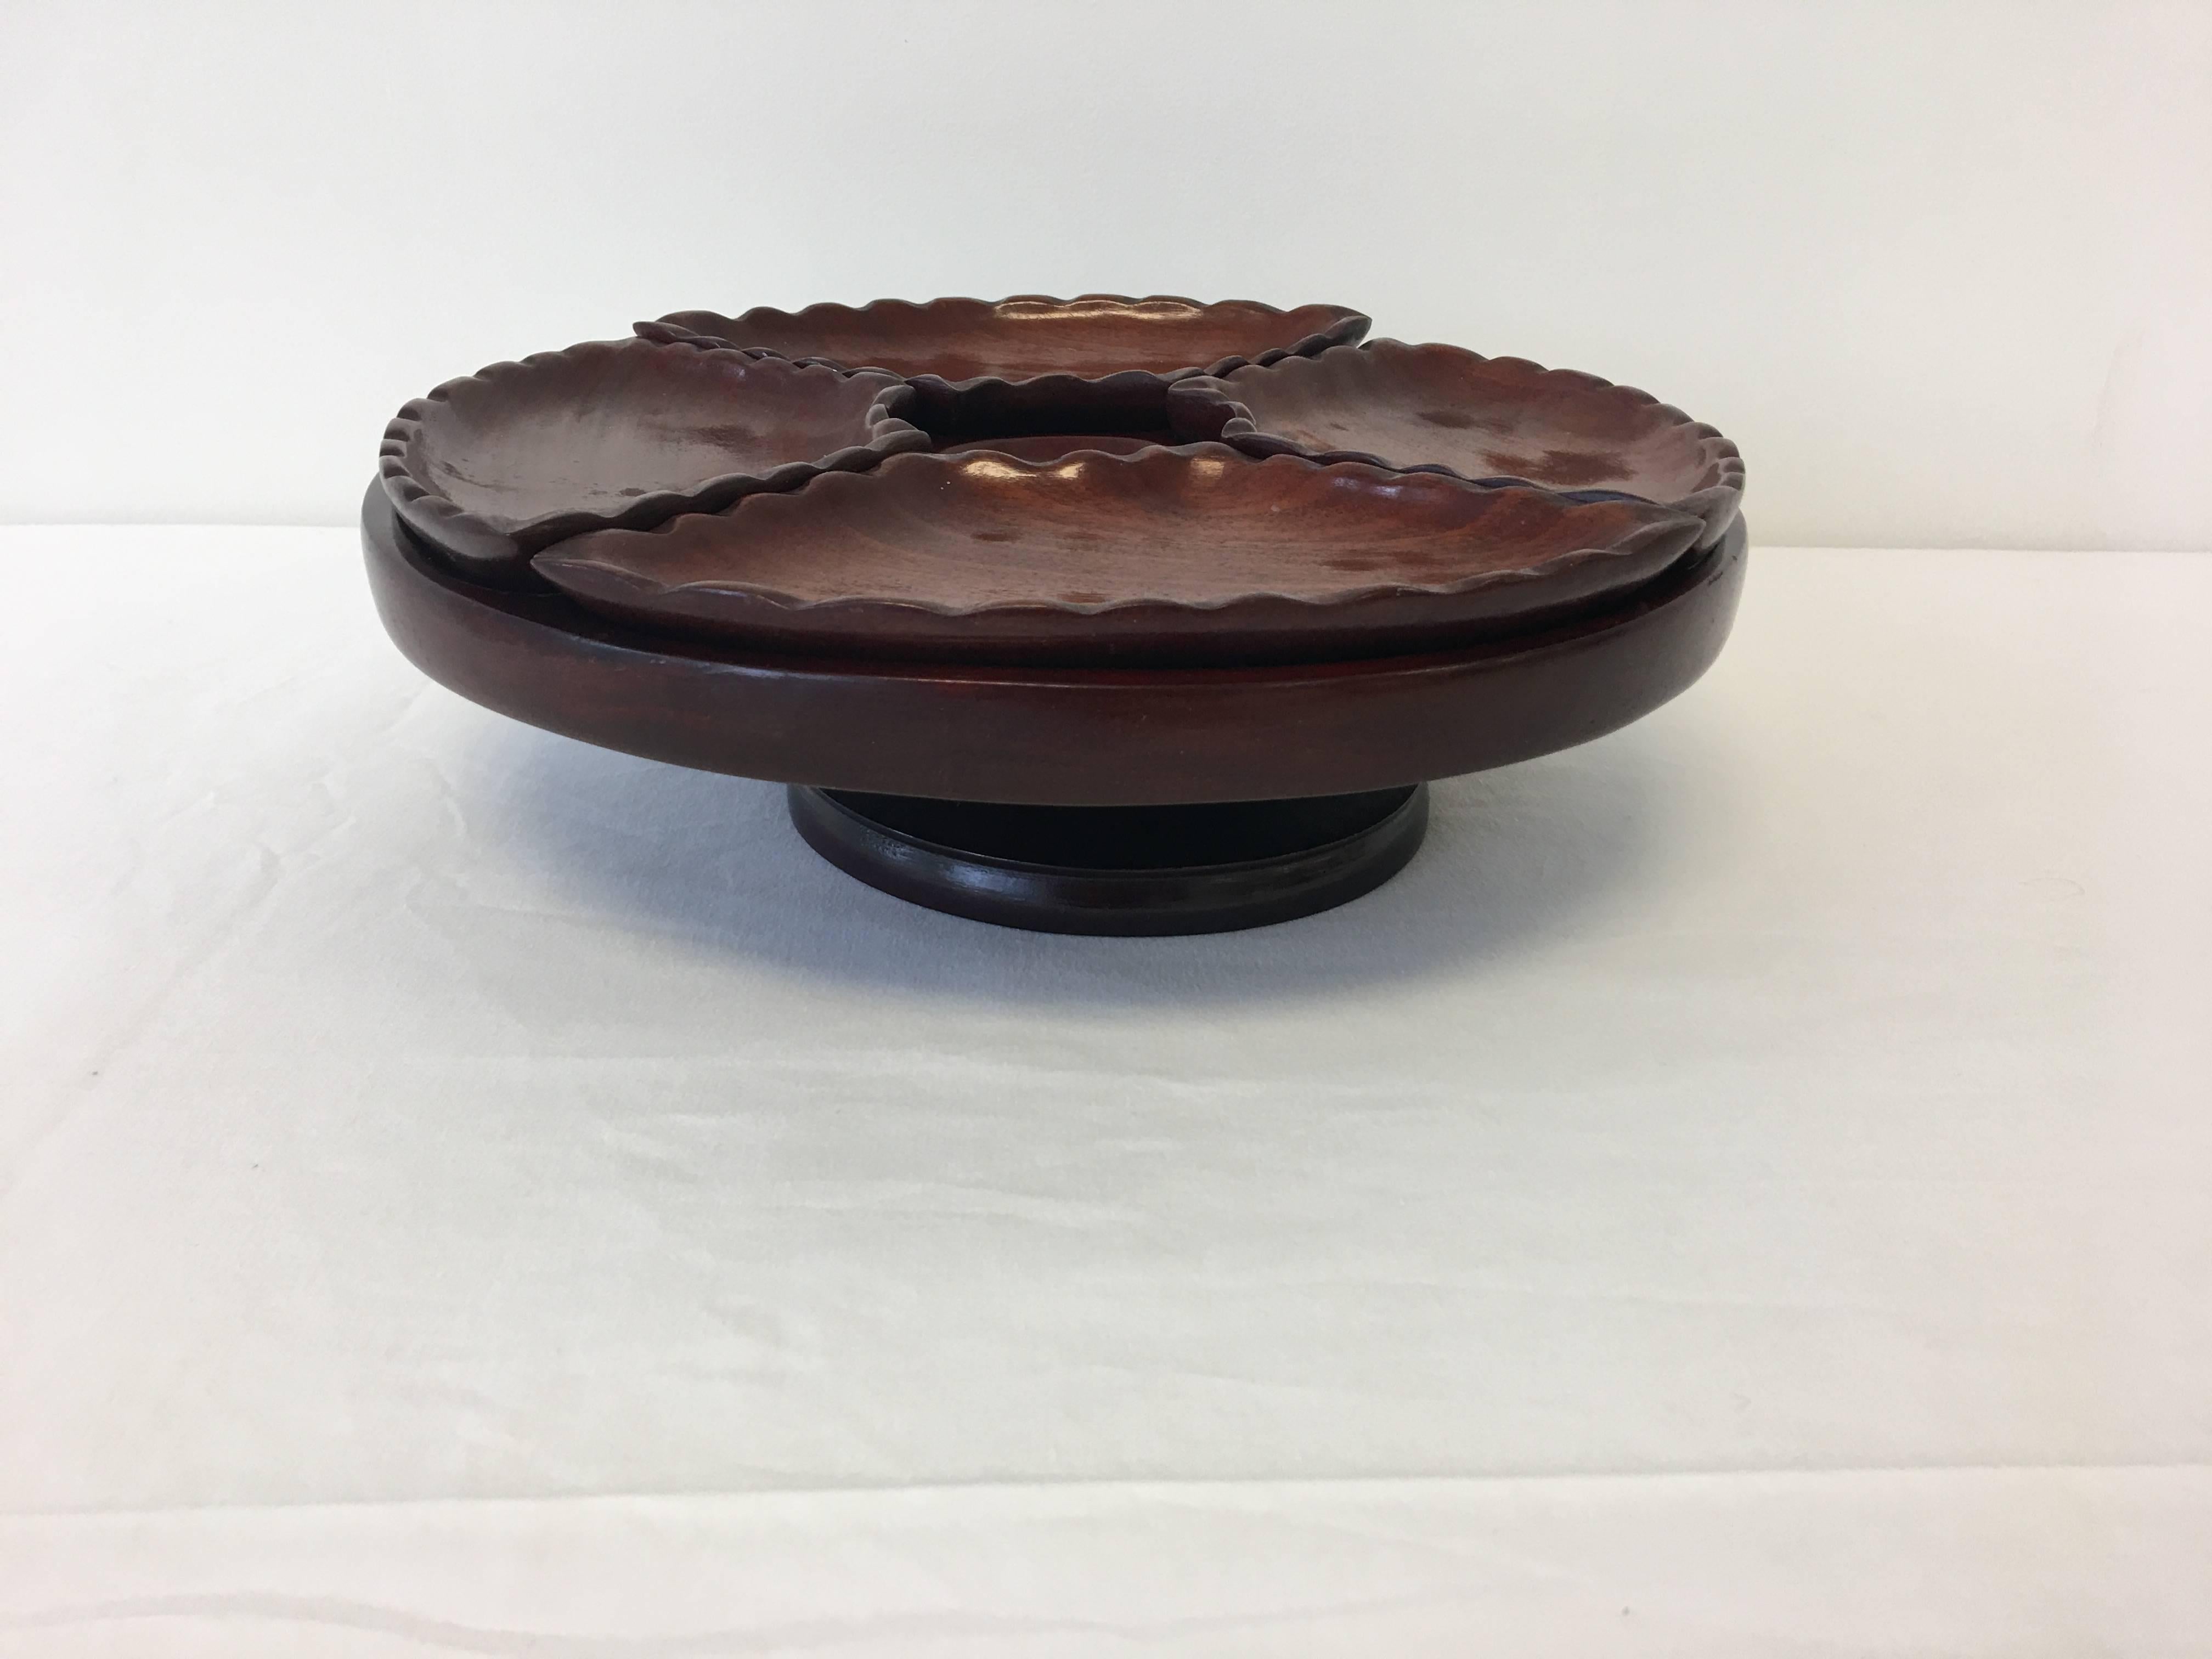 Offered is a fabulous, 1950s Mid-Century Modern rosewood pedestal five-piece serving tray. Includes four dishes and one rotating pedestal.

Each dish measures: 1